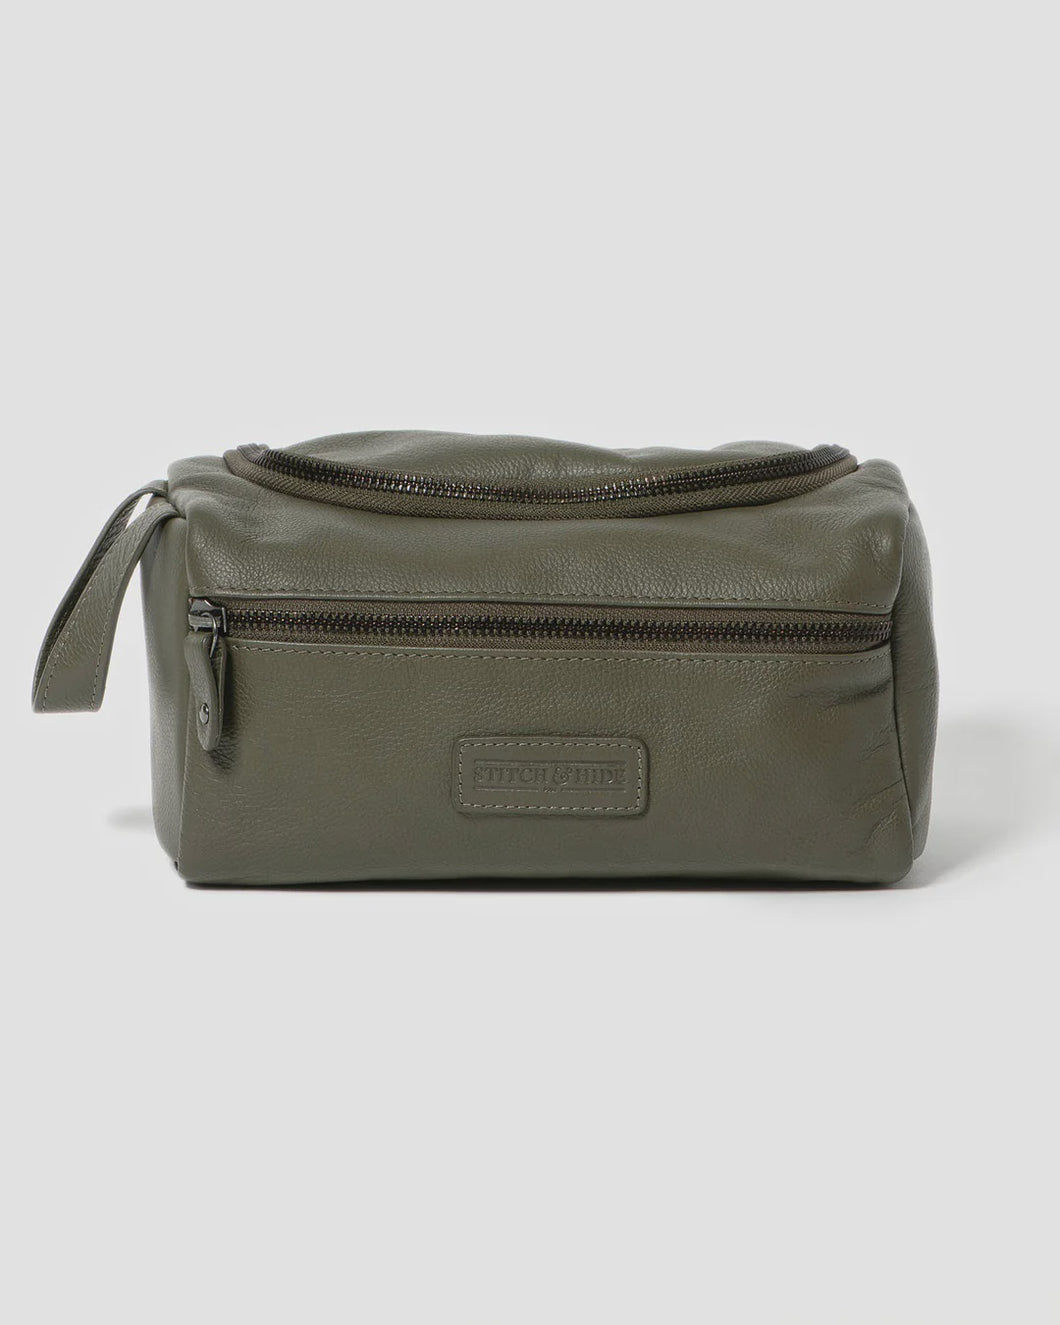 STITCH & HIDE - JETT TOILETRY BAG in OLIVE